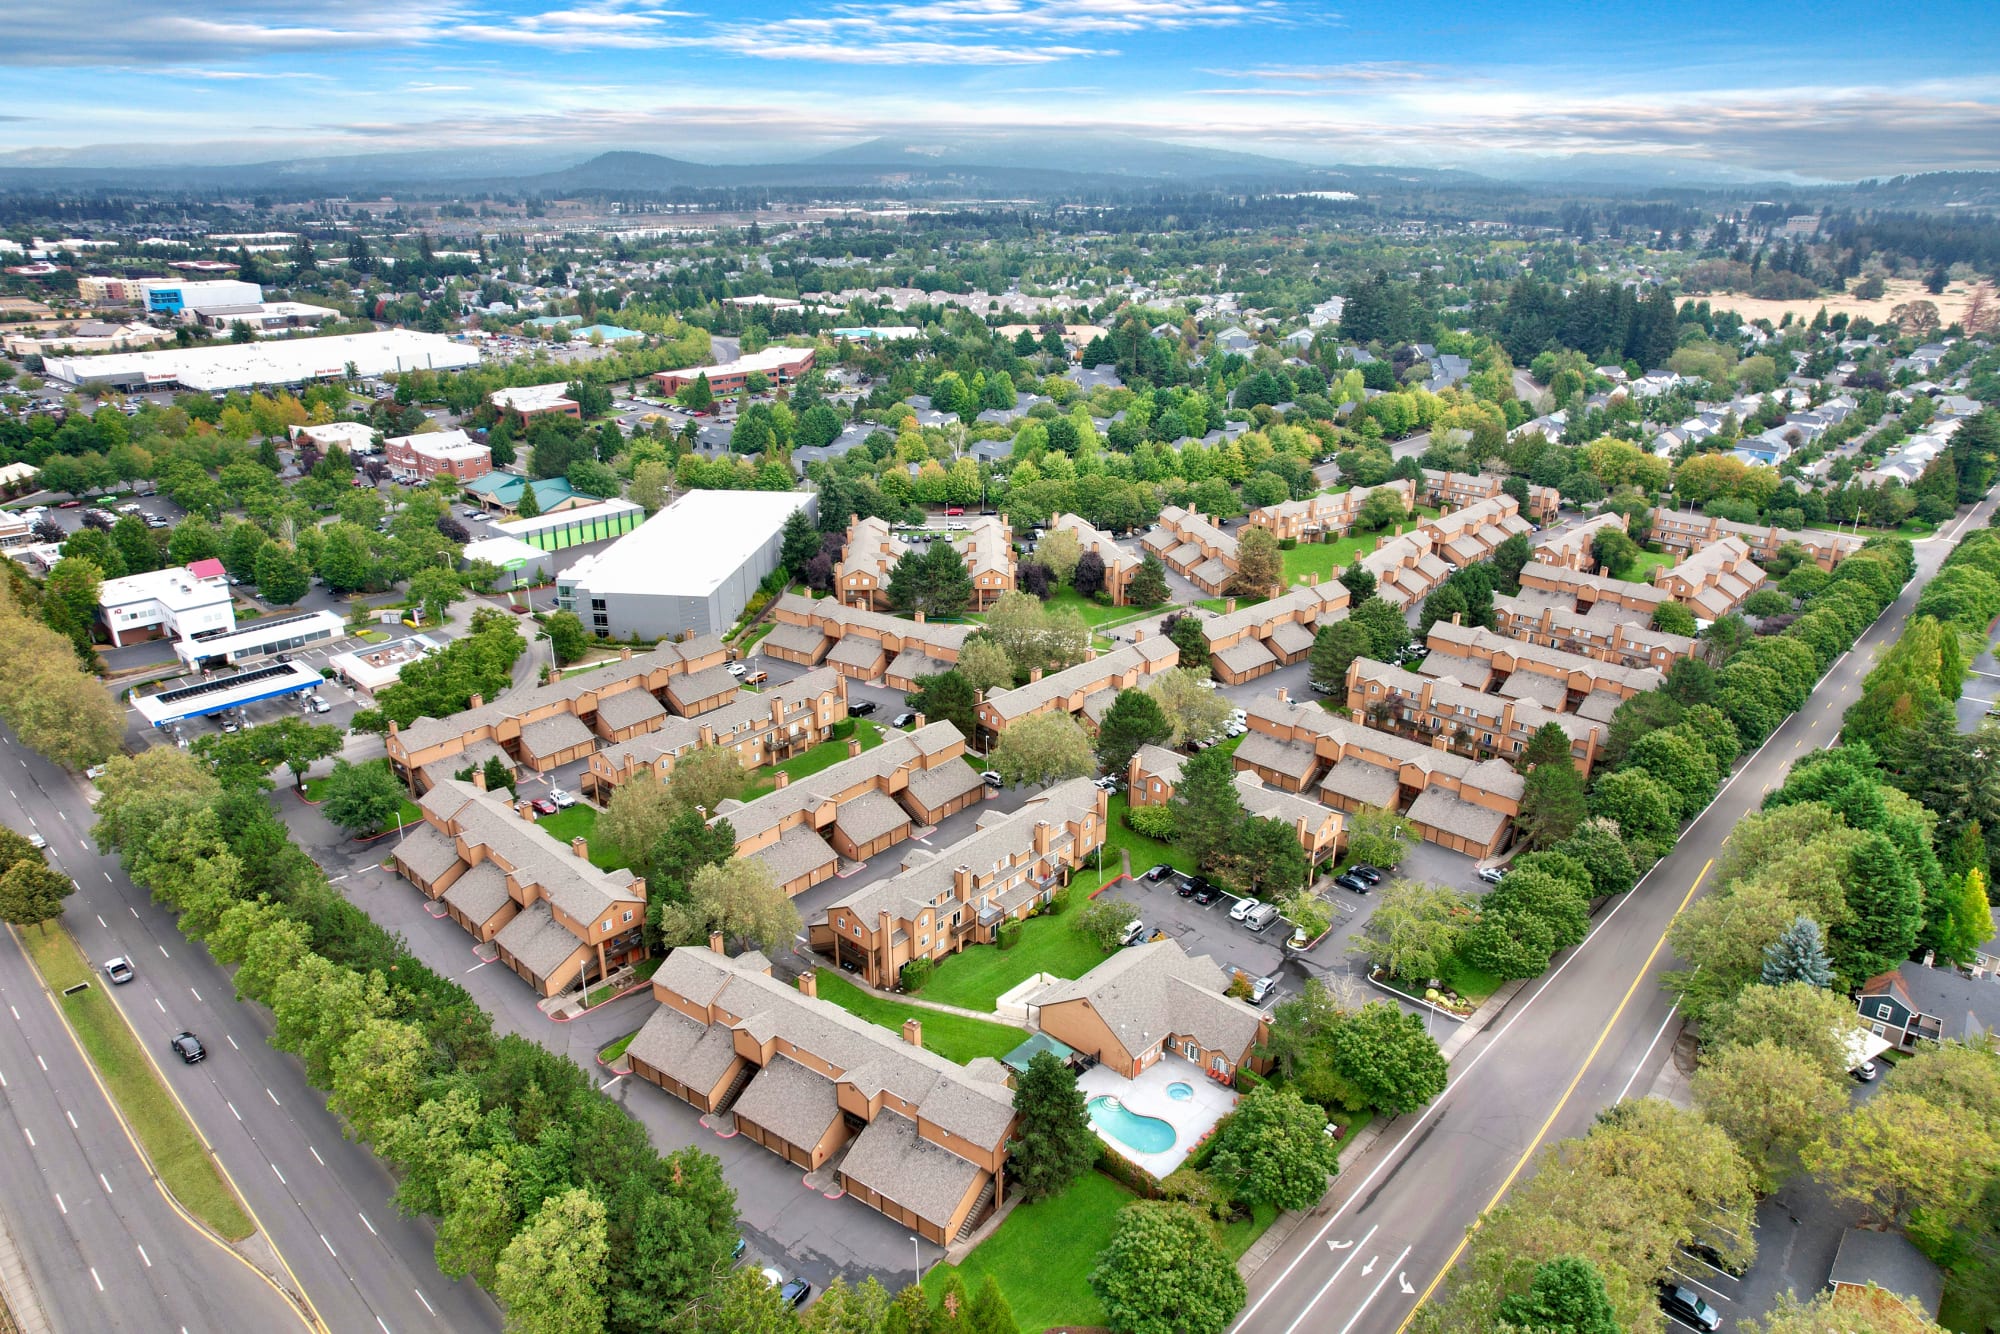 Aerial view of the property and surrounding area at Renaissance at 29th Apartments in Vancouver, Washington